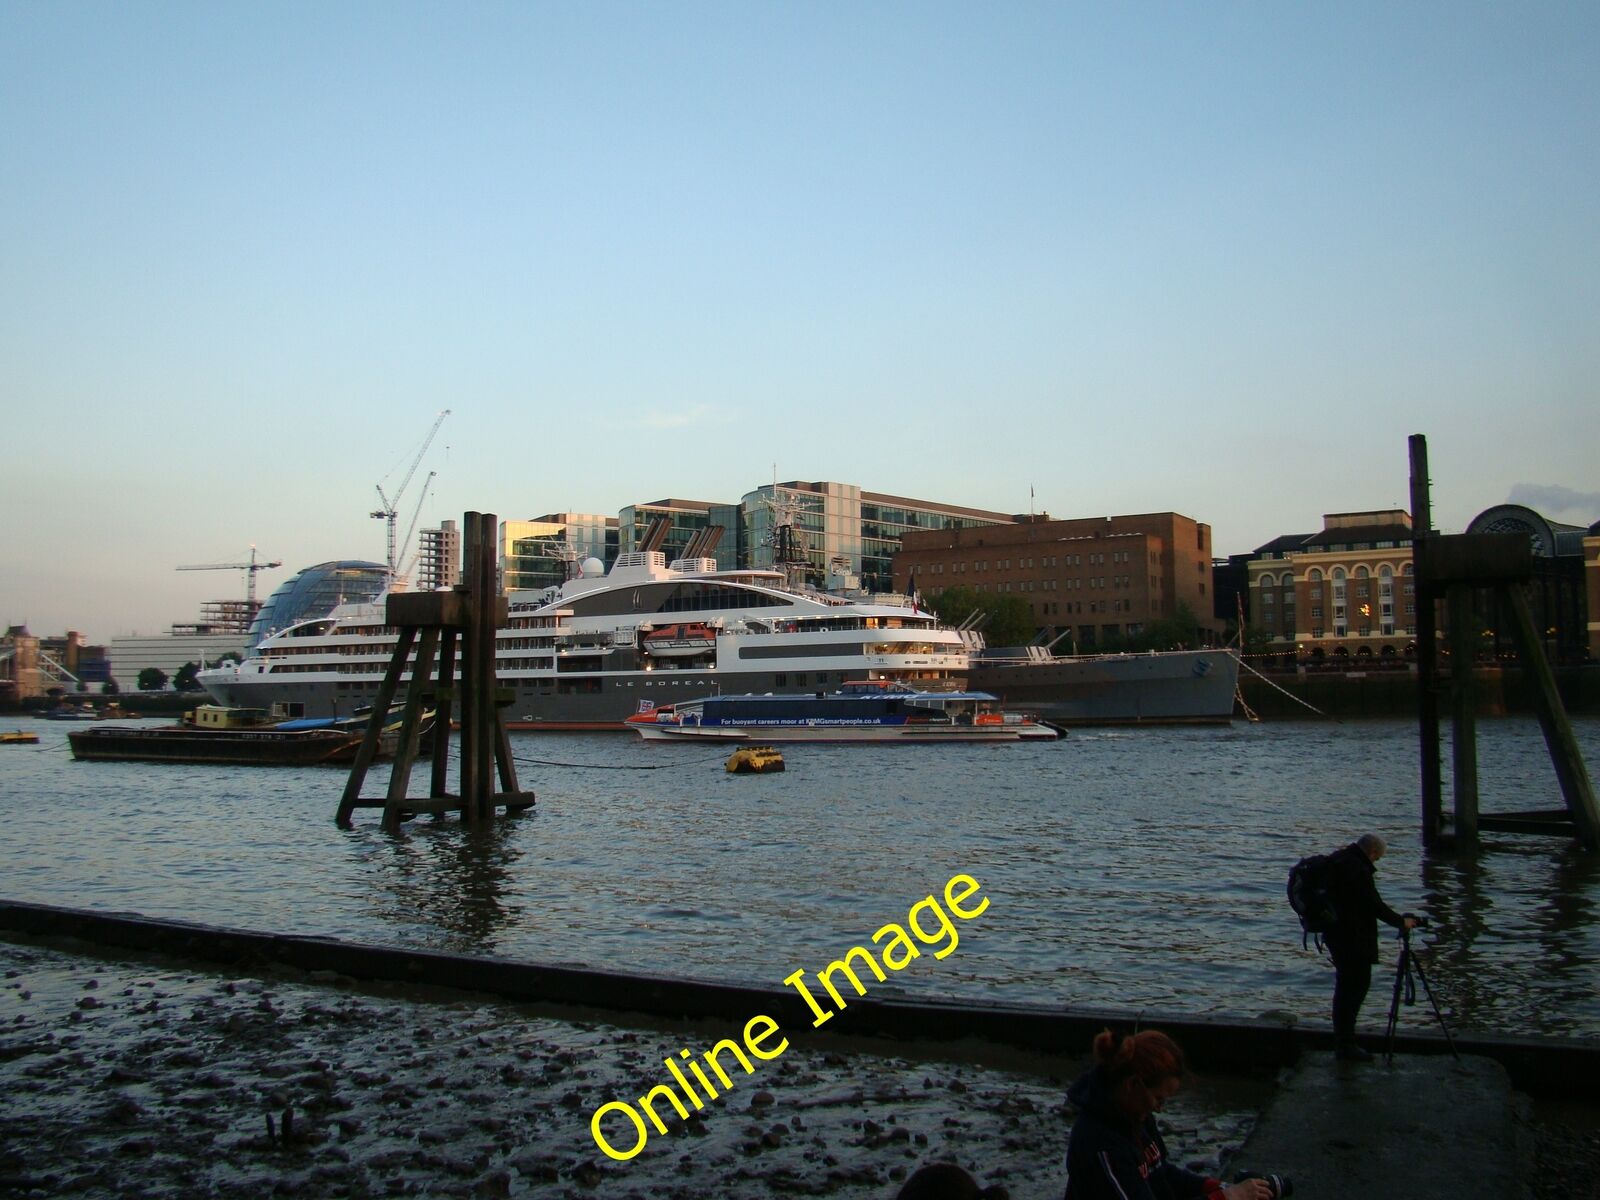 Photo 6x4 View of a Thames Clipper passing Le Boreal and HMS Belfast Lond c2014